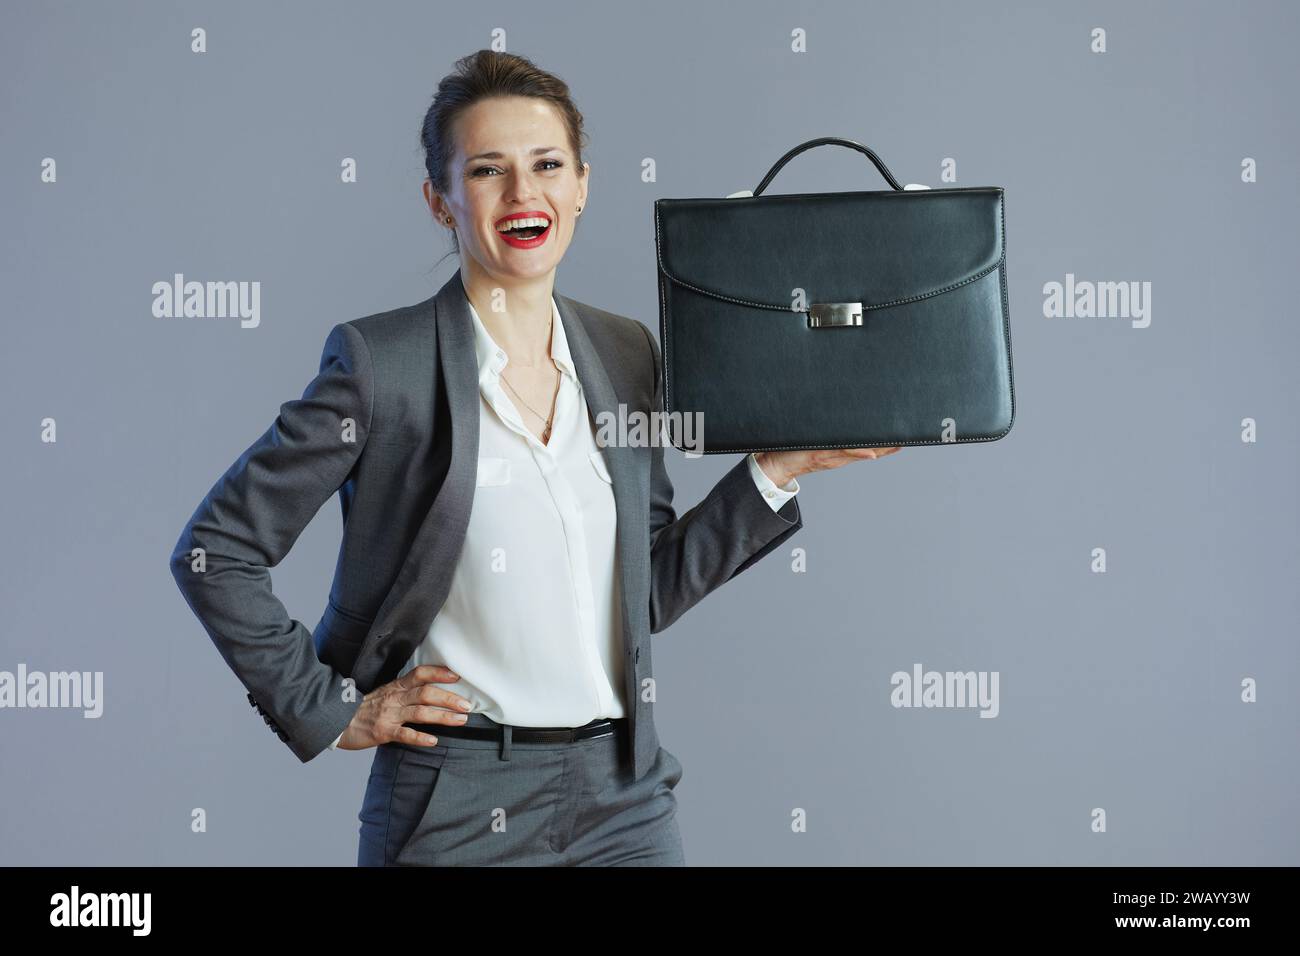 smiling elegant small business owner woman in grey suit with briefcase against gray background. Stock Photo